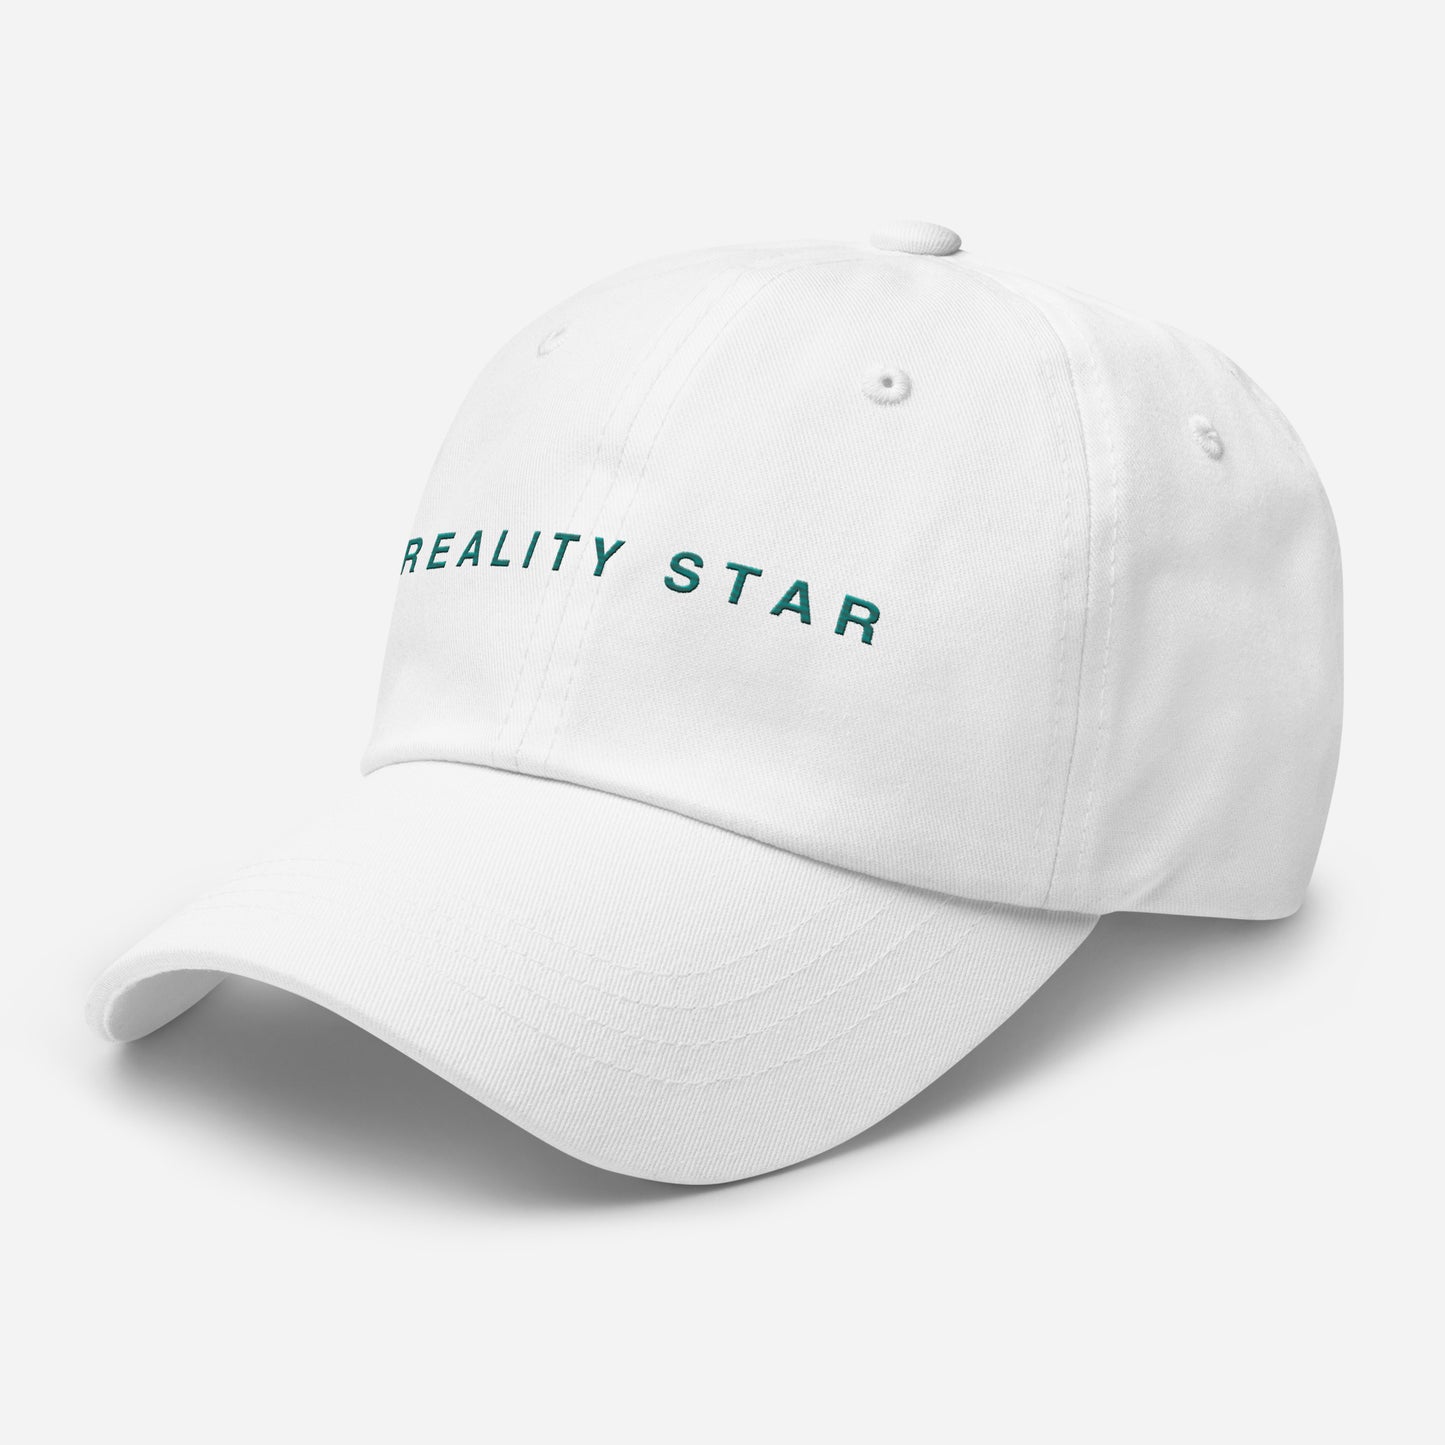 Reality Star Embroidered Dad hat